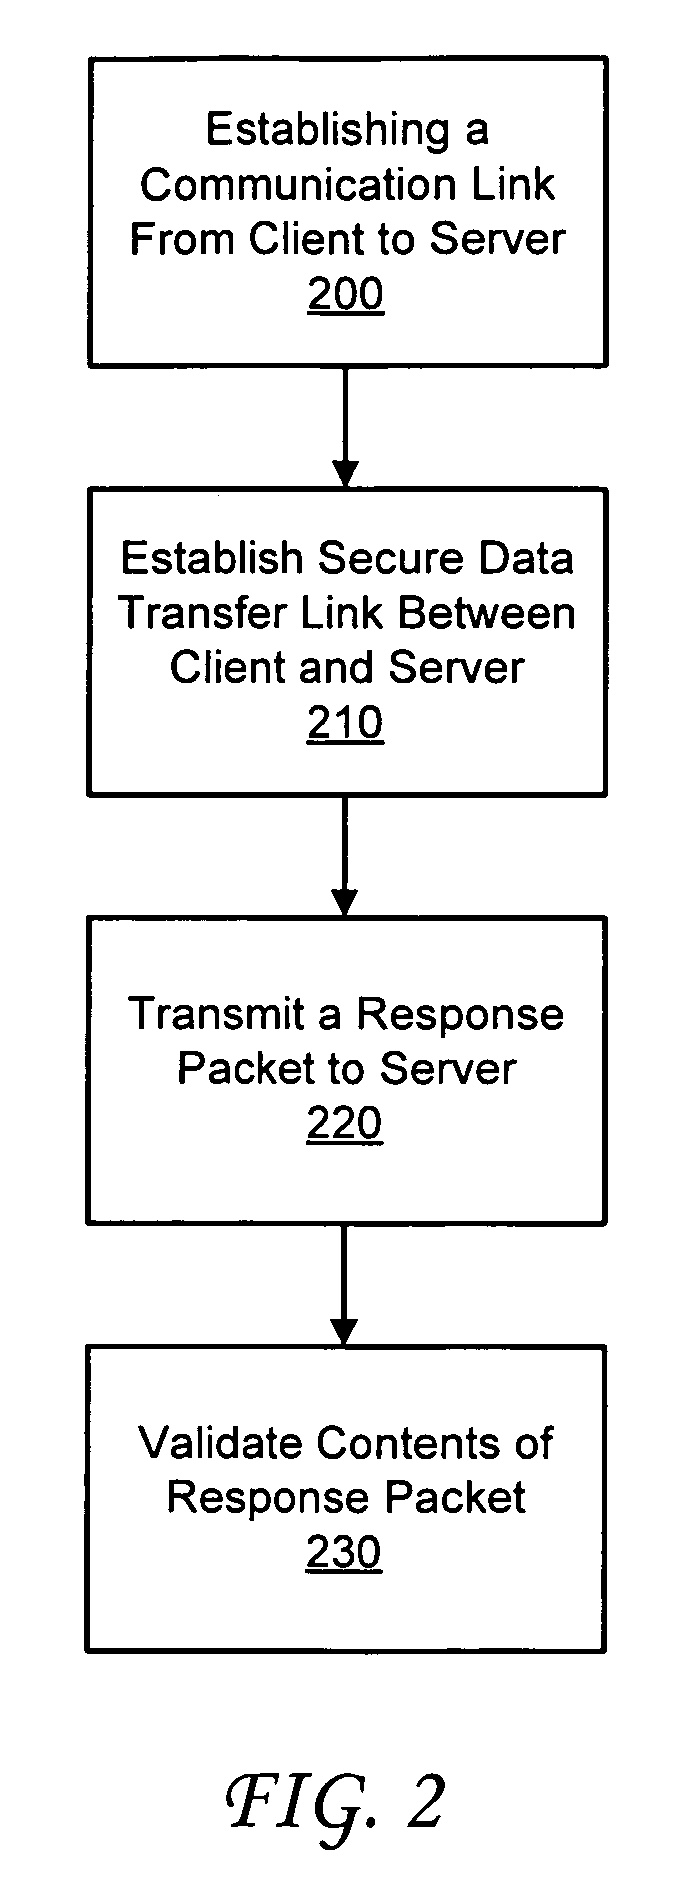 System and method for secured network access utilizing a client .net software component